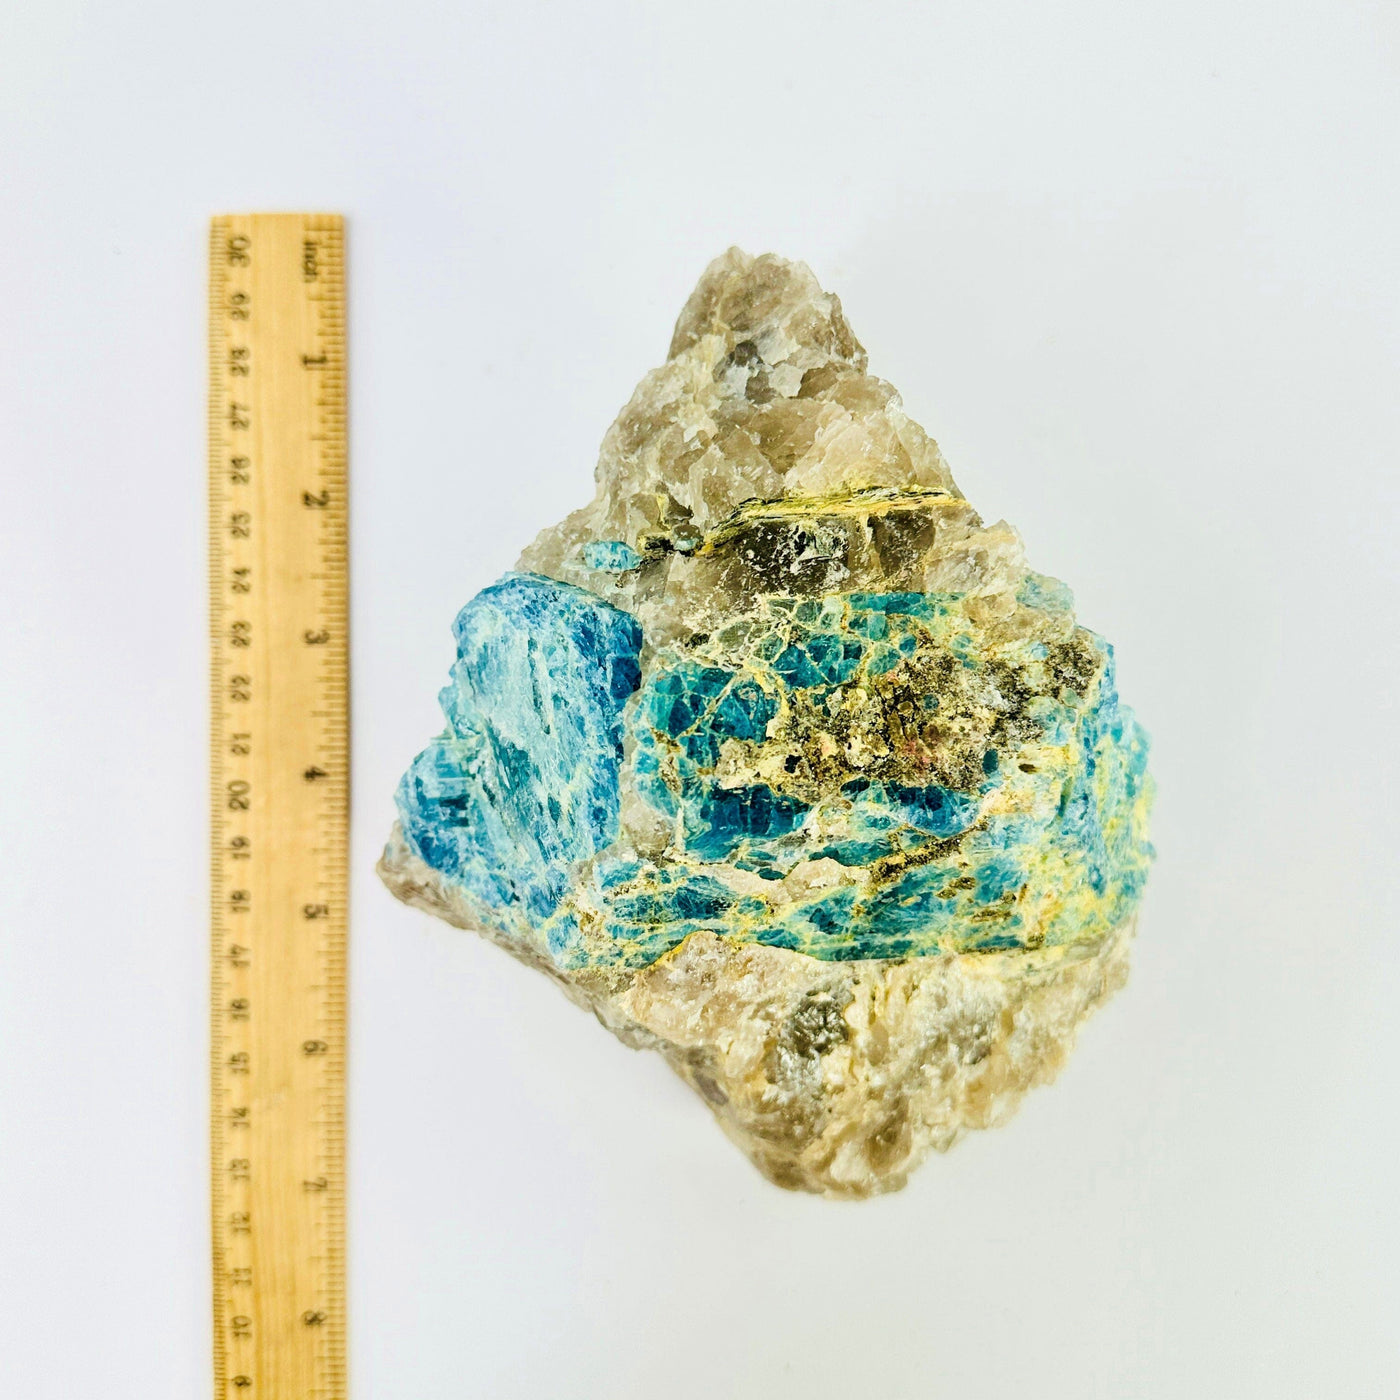 Aquamarine in matrix - natural rough stone next to ruler for size reference